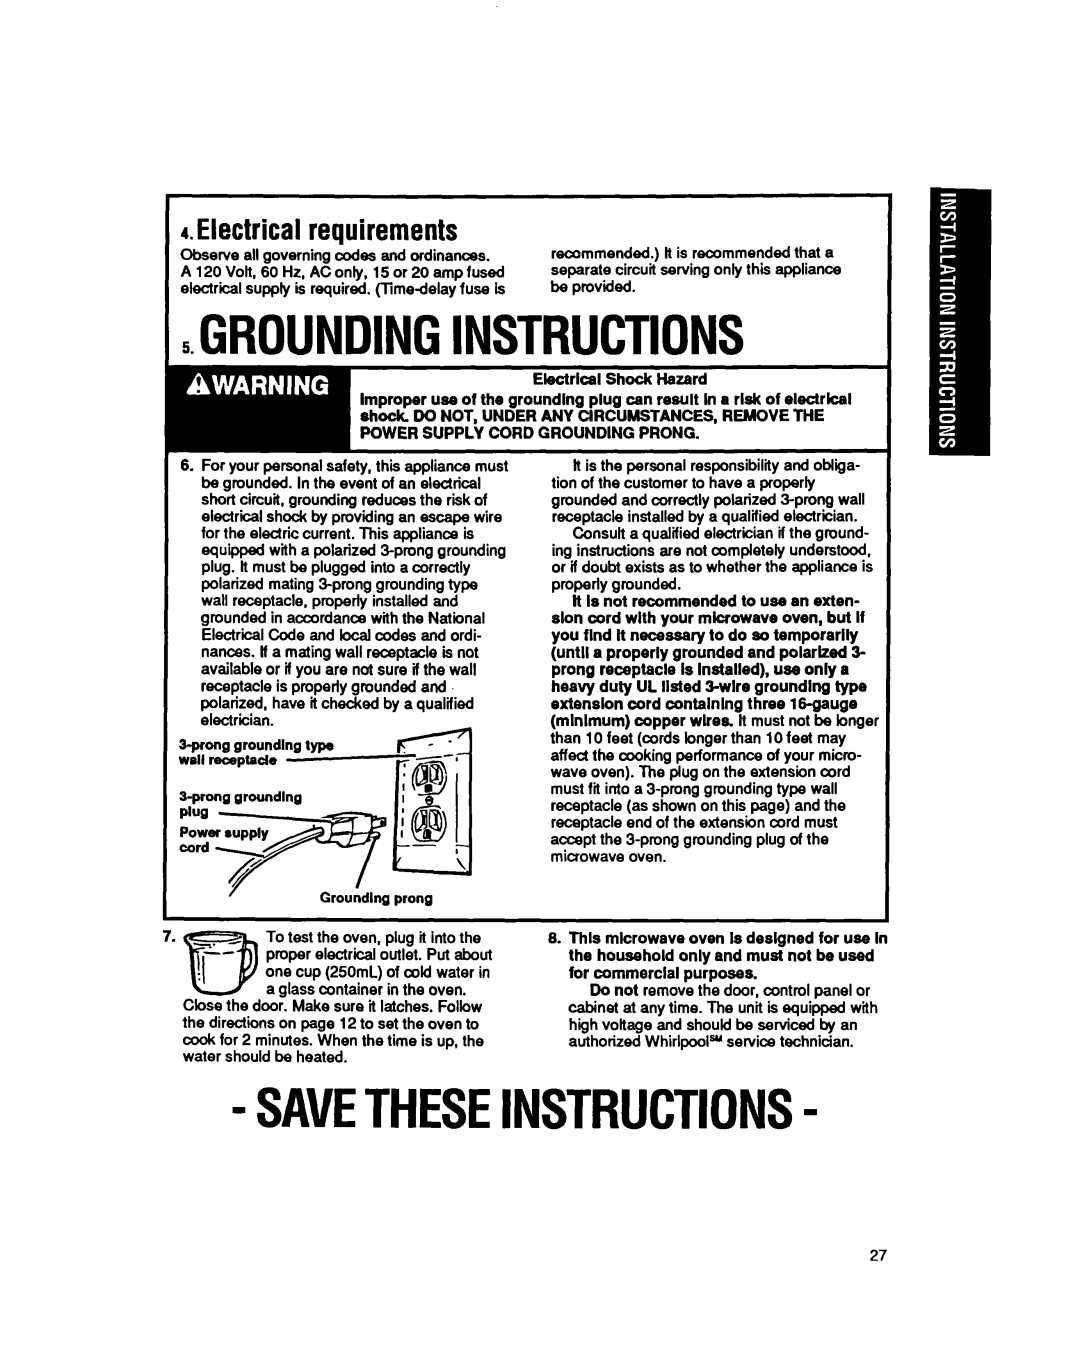 Whirlpool MB7120XY manual 5GROUNDING.INSTRUCTIONS, Savetheseinstructions, Electrical requirements 